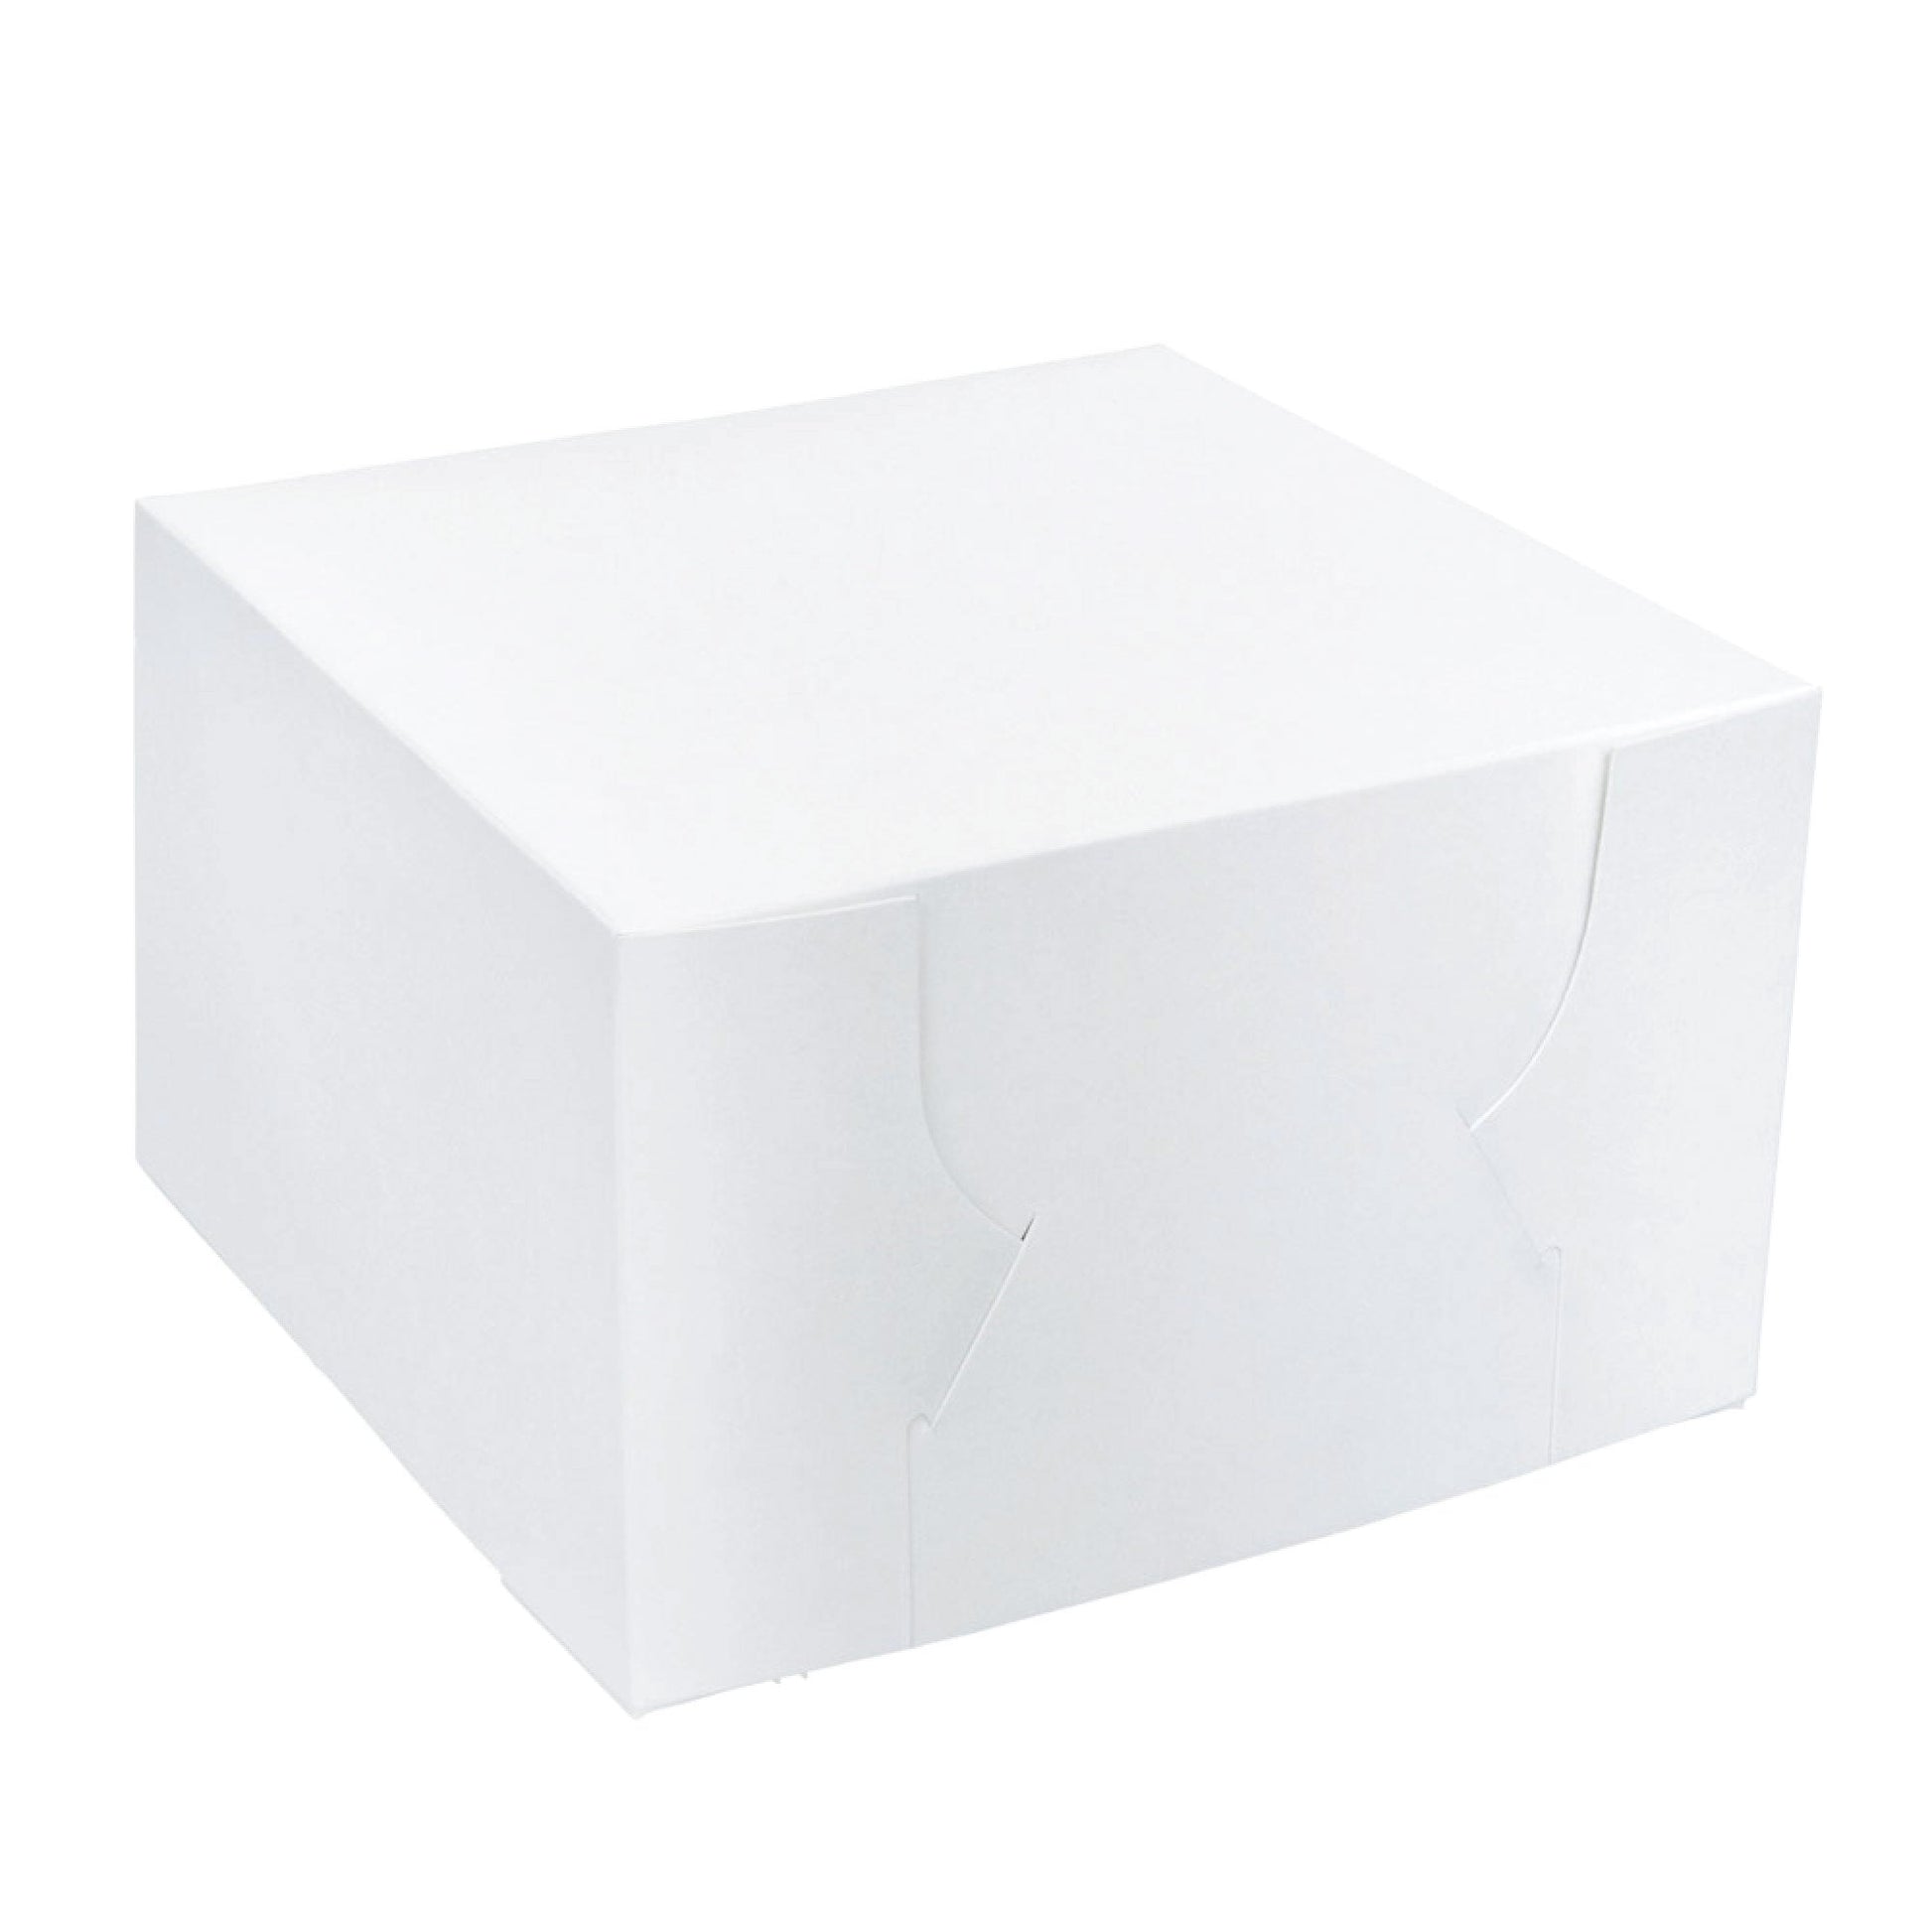 50x Takeaway Cake Box 10x10x6 Inches - Square Folding White Dessert Packaging